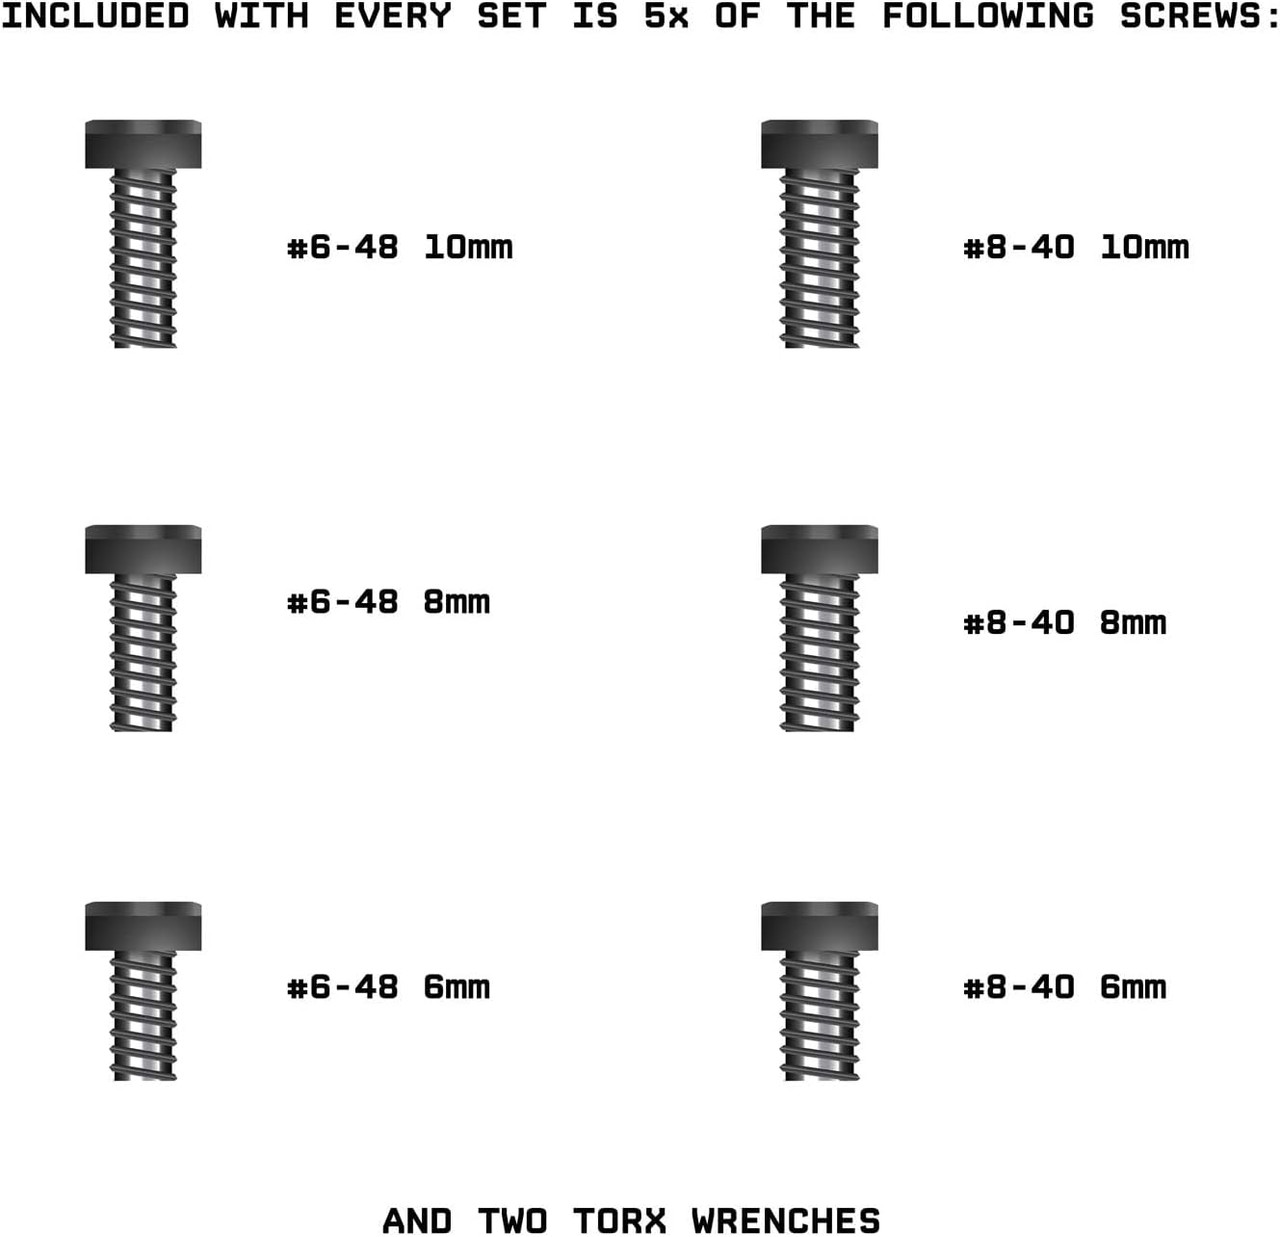 Savage Rifle Screw Size Guide: How to Identify #6-48 vs #8-40